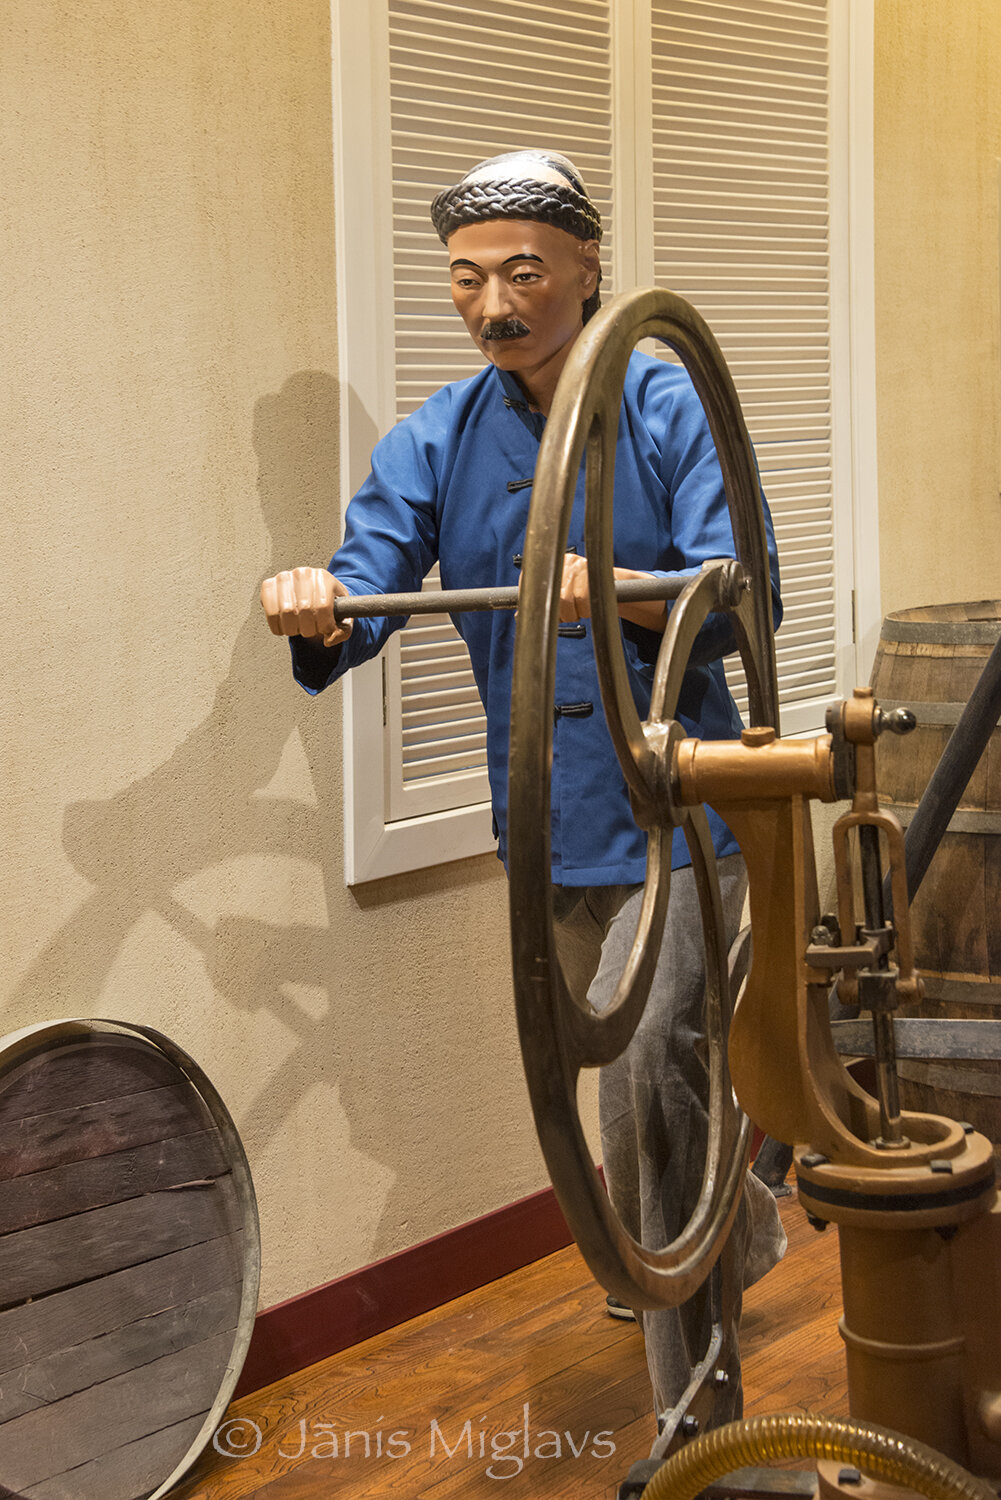 Model of Chinese worker working hand-powered grape wine press at winery visitor center.